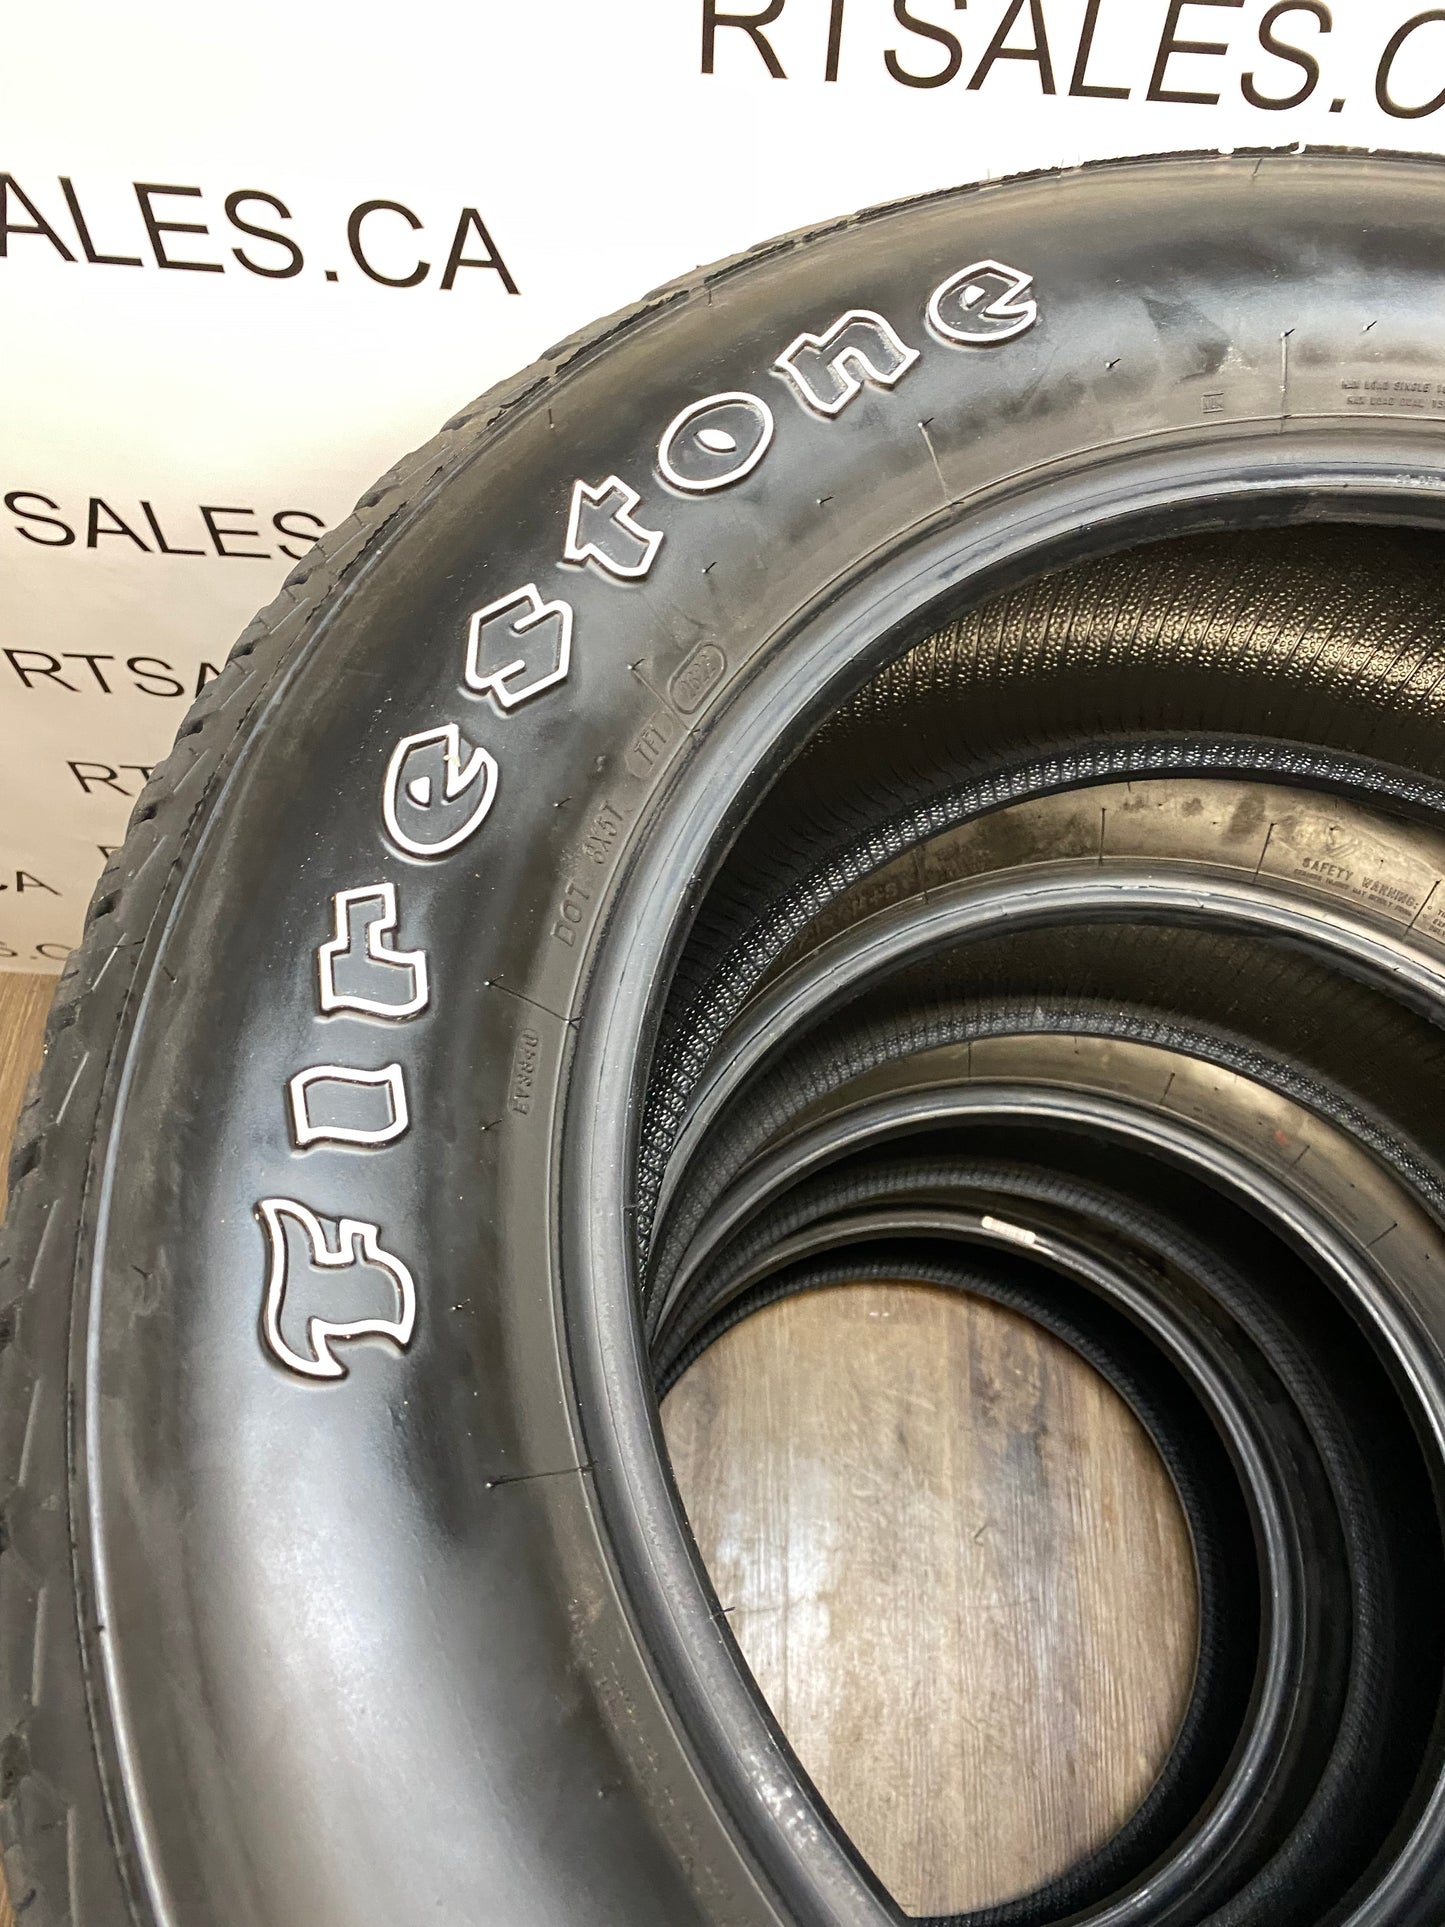 LT 285/60/20 Firestone AT E AS (Used)